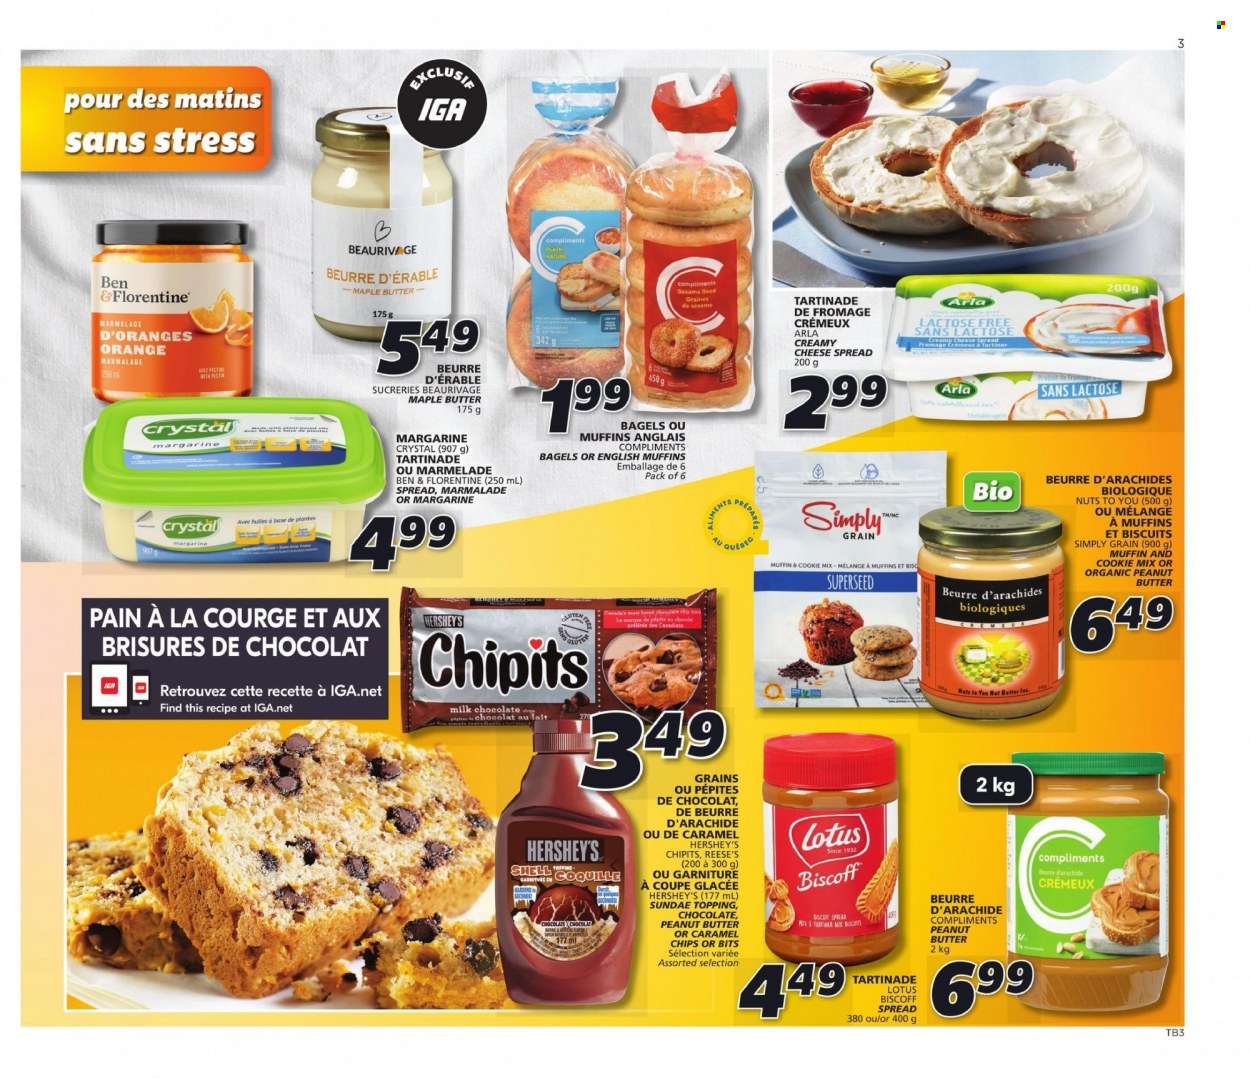 thumbnail - IGA Flyer - October 14, 2021 - October 20, 2021 - Sales products - bagels, english muffins, cheese spread, Arla, margarine, Reese's, Hershey's, milk chocolate, chocolate, biscuit, sesame seed, topping, peanut butter, nut butter, chips, oranges. Page 3.